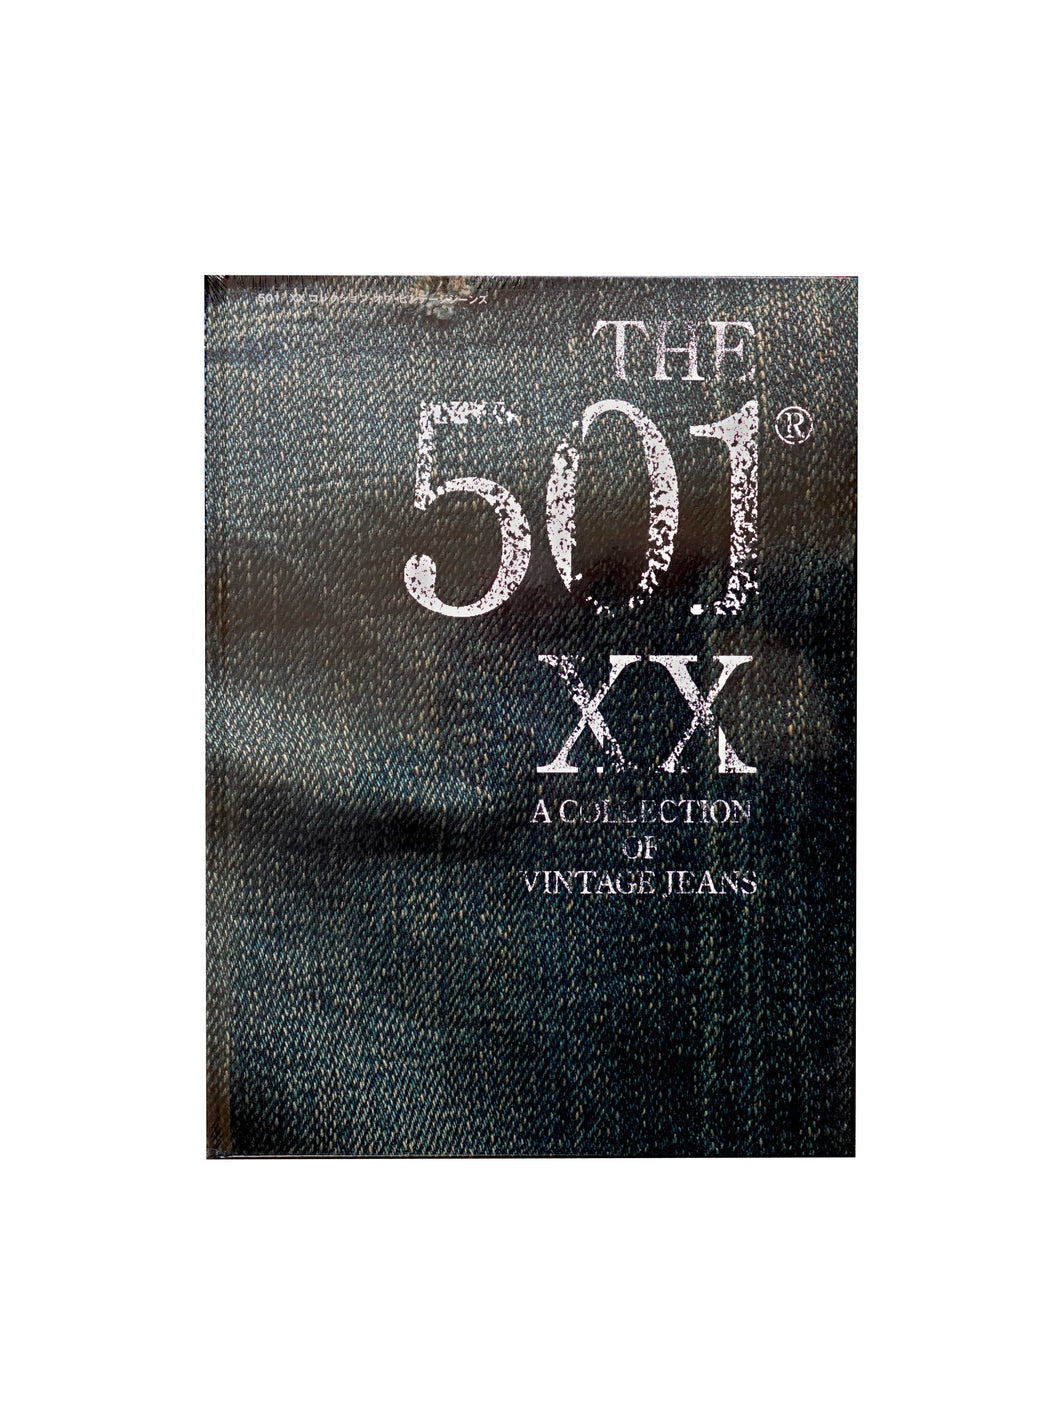 The 501 xx a collection of vintage Jeans